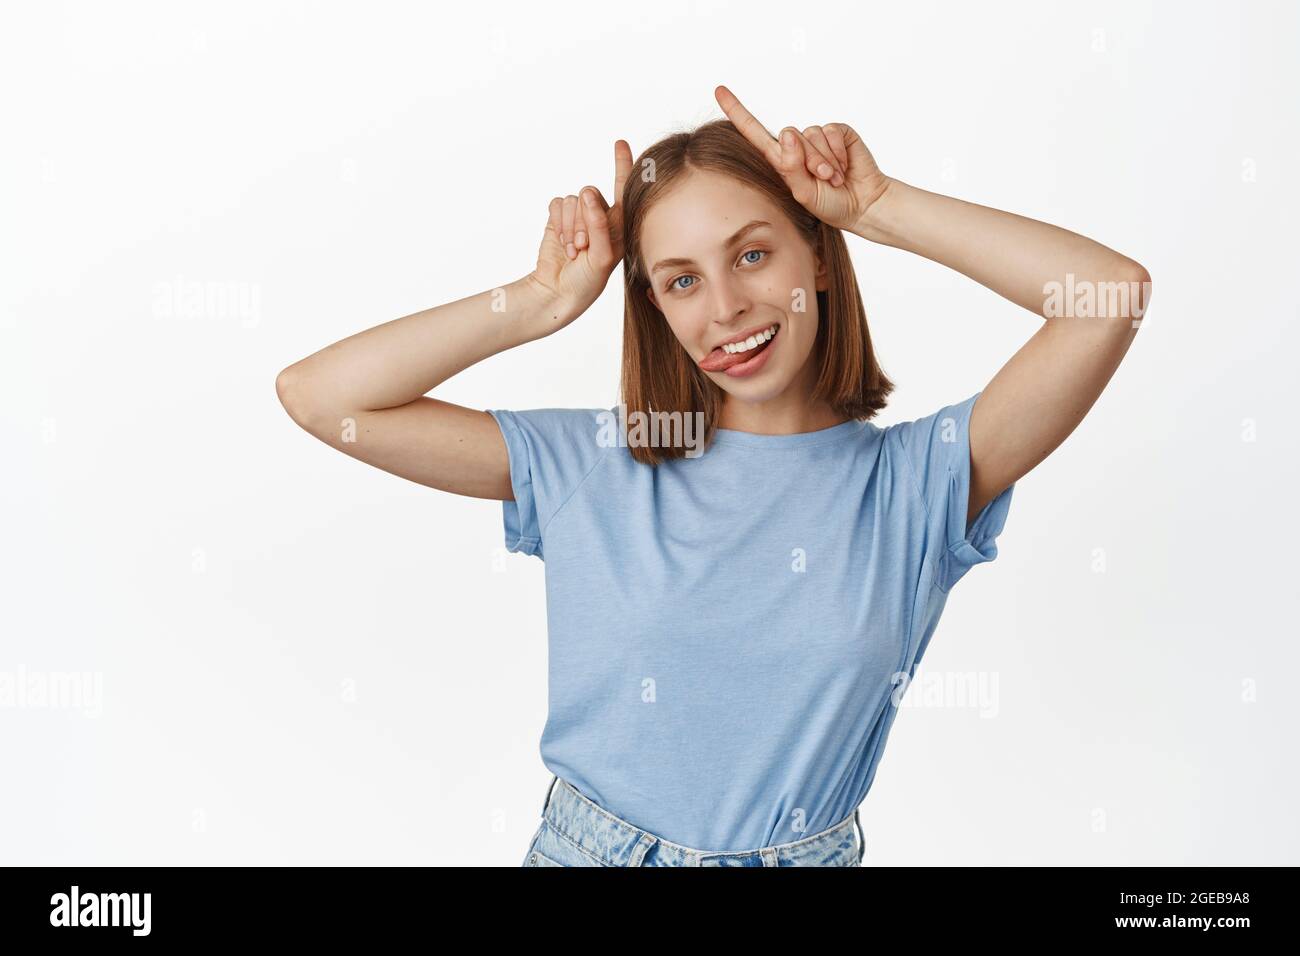 Young carefree blond woman show tongue, bull devil horns gesture on head, smiling carefree, having fun, being playful and silly, standing in t-shirt Stock Photo